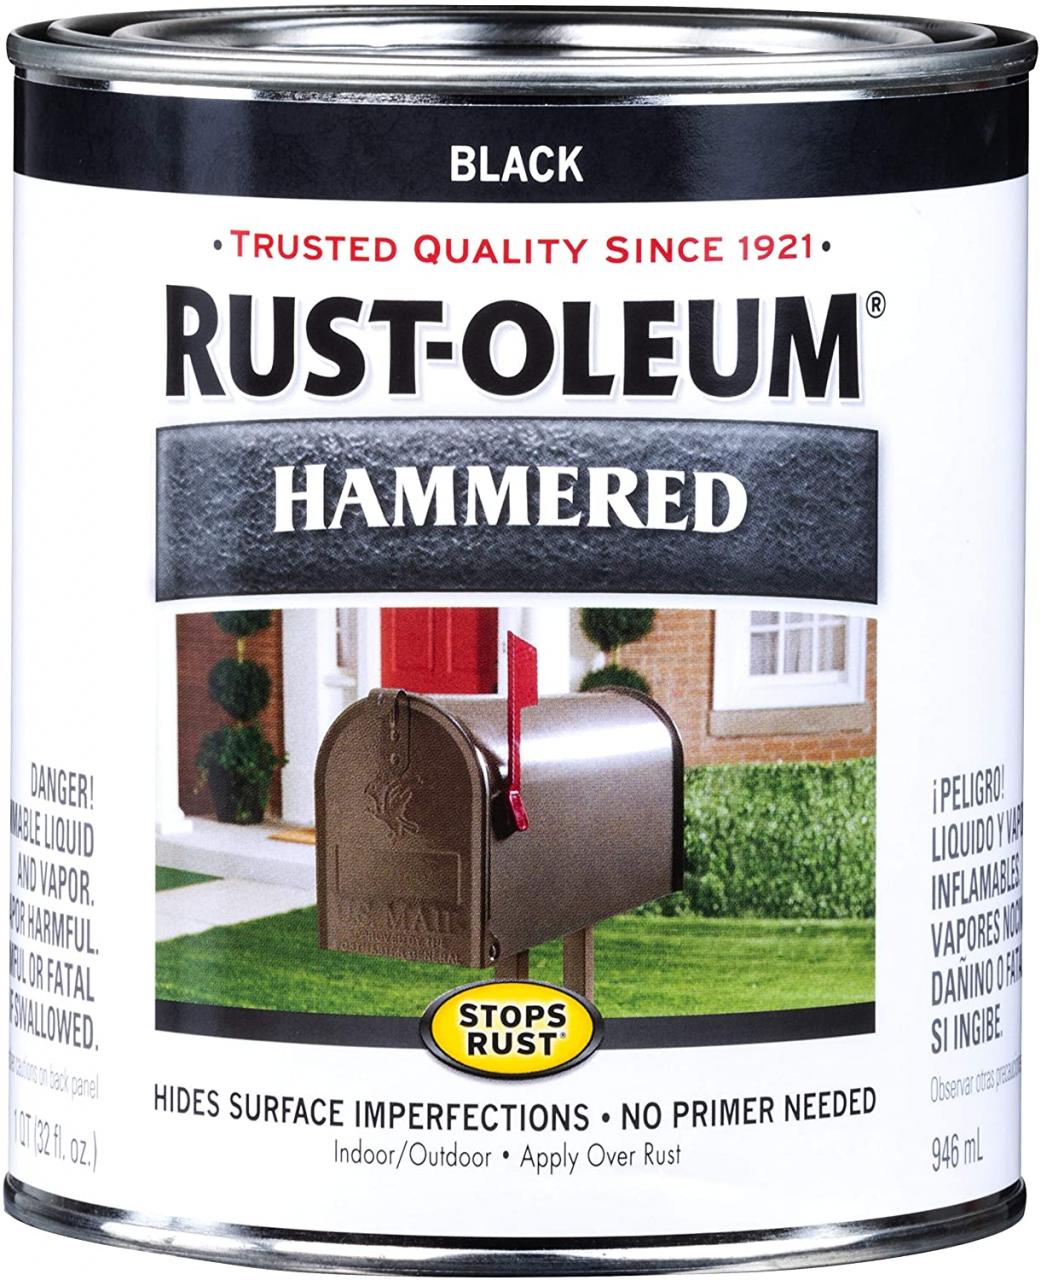 Stops Rust® Hammered Product Page